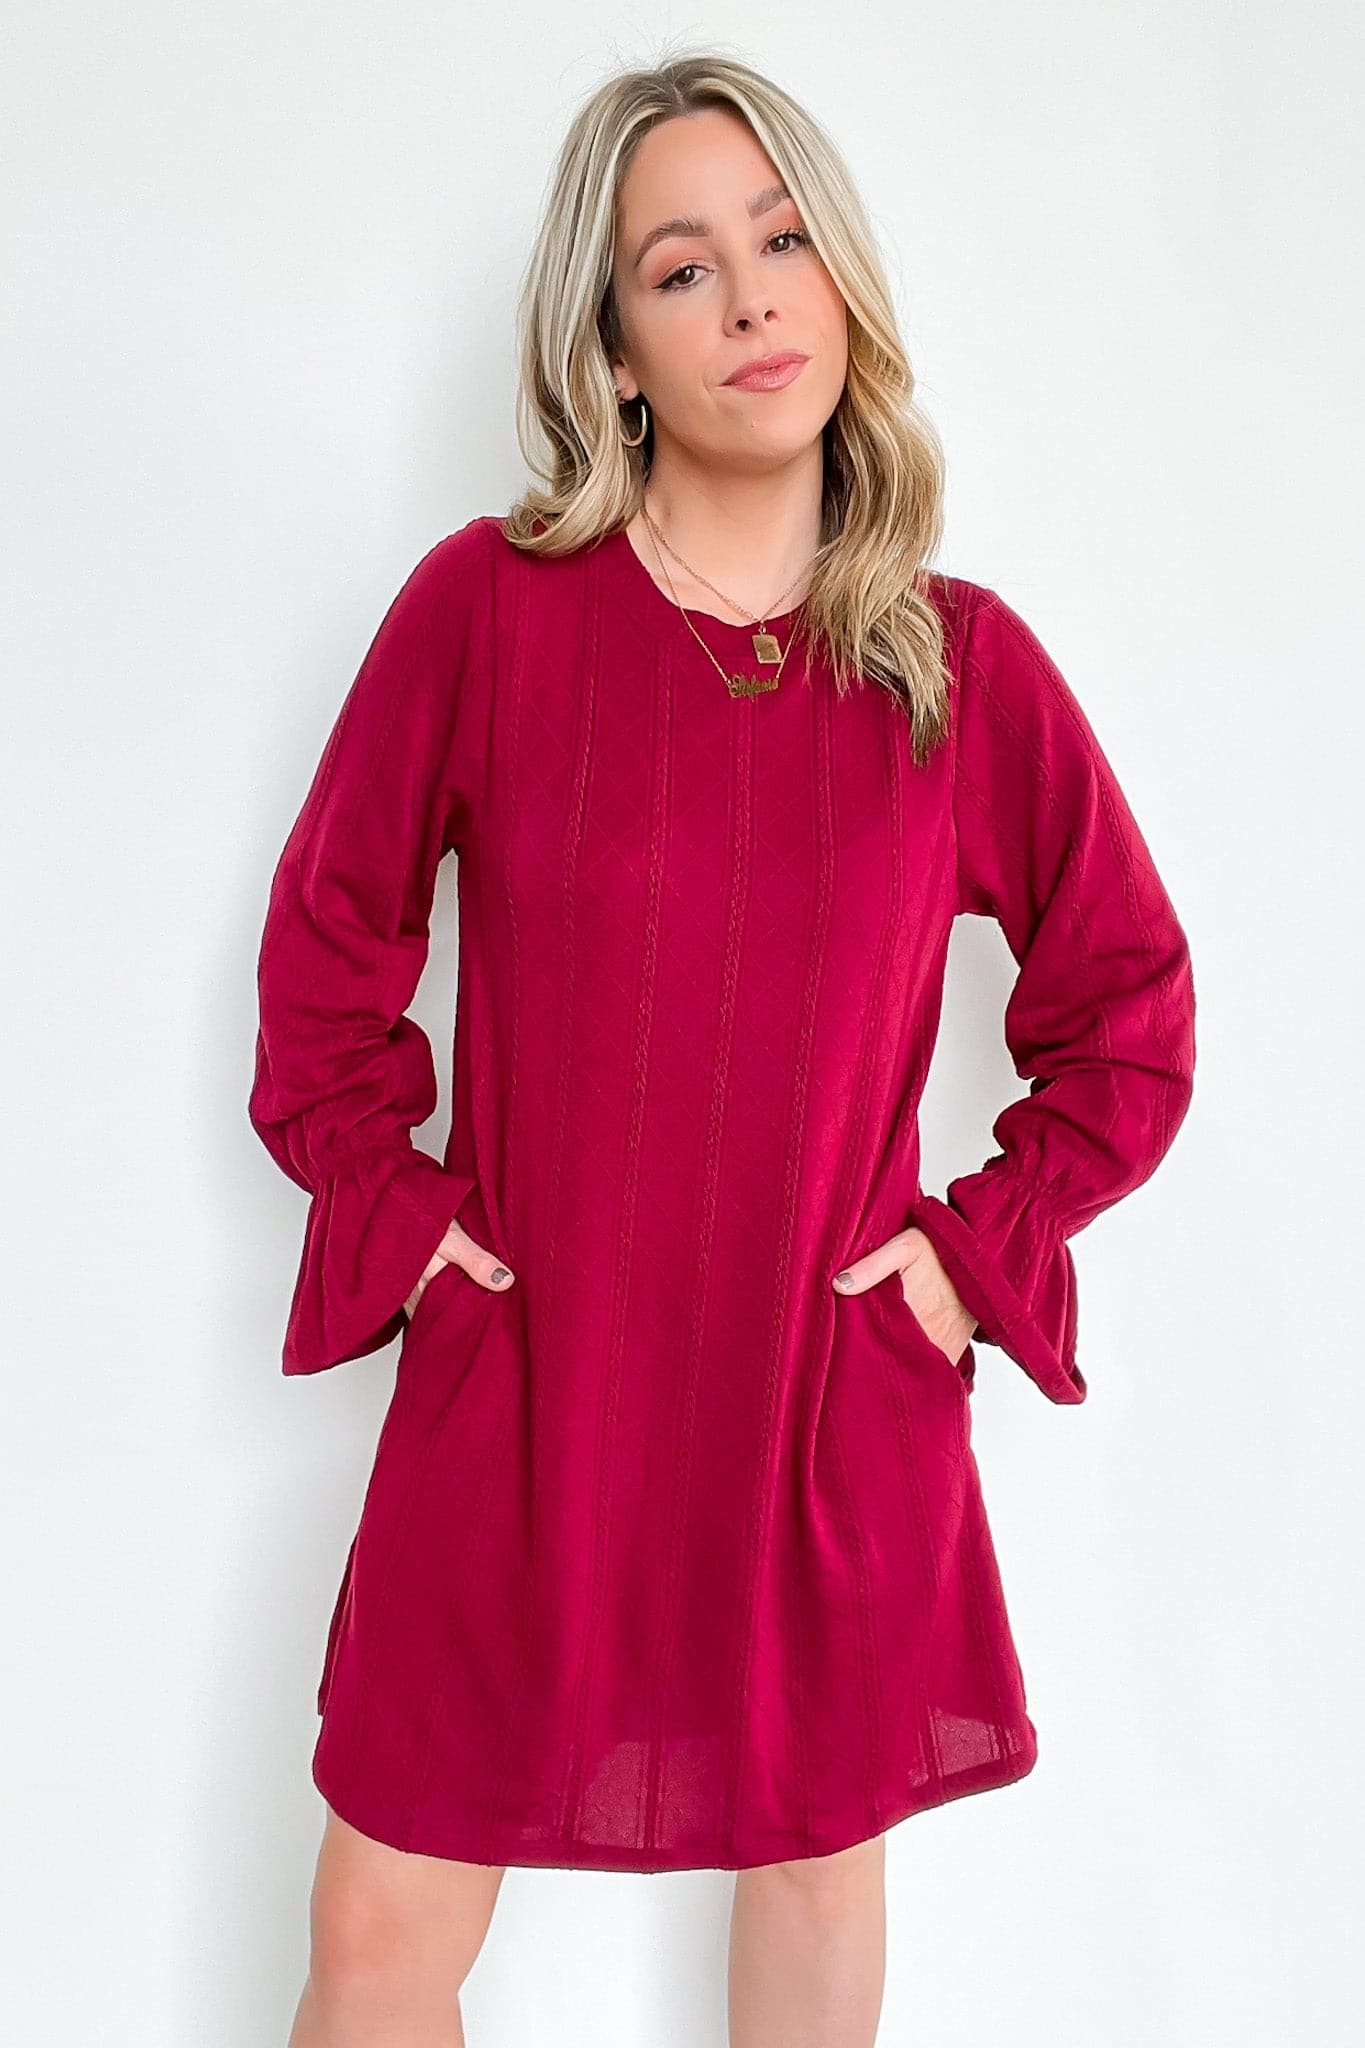  Call Me Cozy Cable Knit Bell Sleeve Dress - FINAL SALE - Madison and Mallory